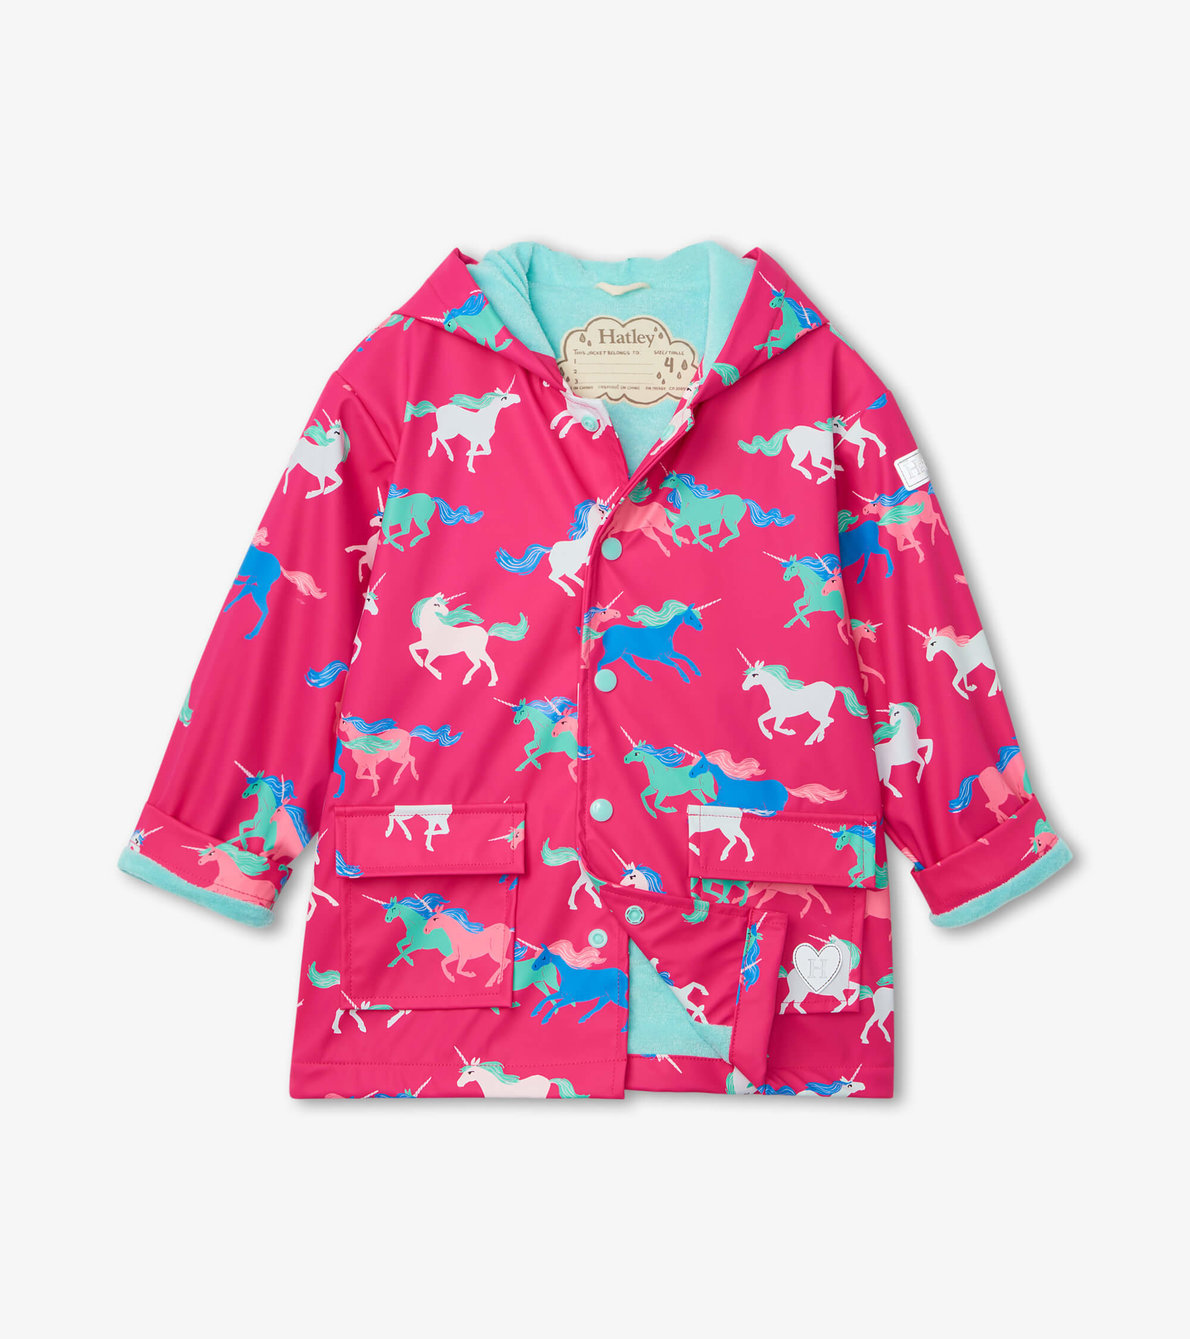 View larger image of Frolicking Unicorns Colour Changing Raincoat